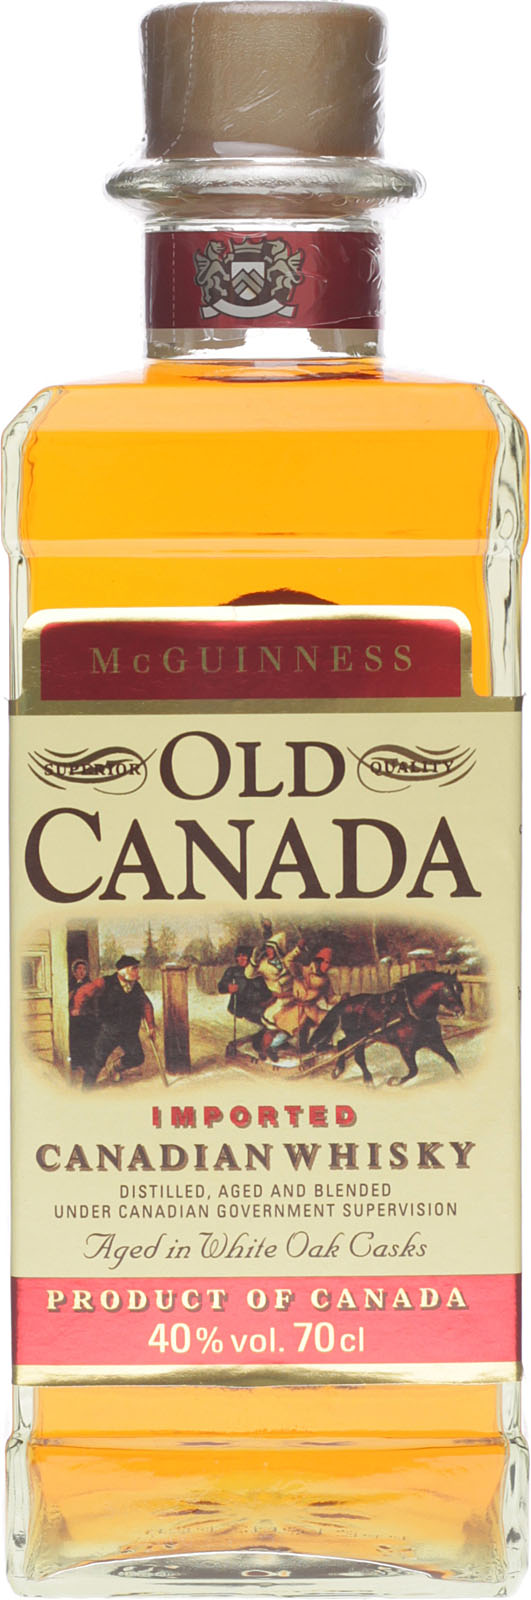 Old-Canada-Mc-Guiness-Whisky-0-7-Liter-40-Vol.2389311a.jpg